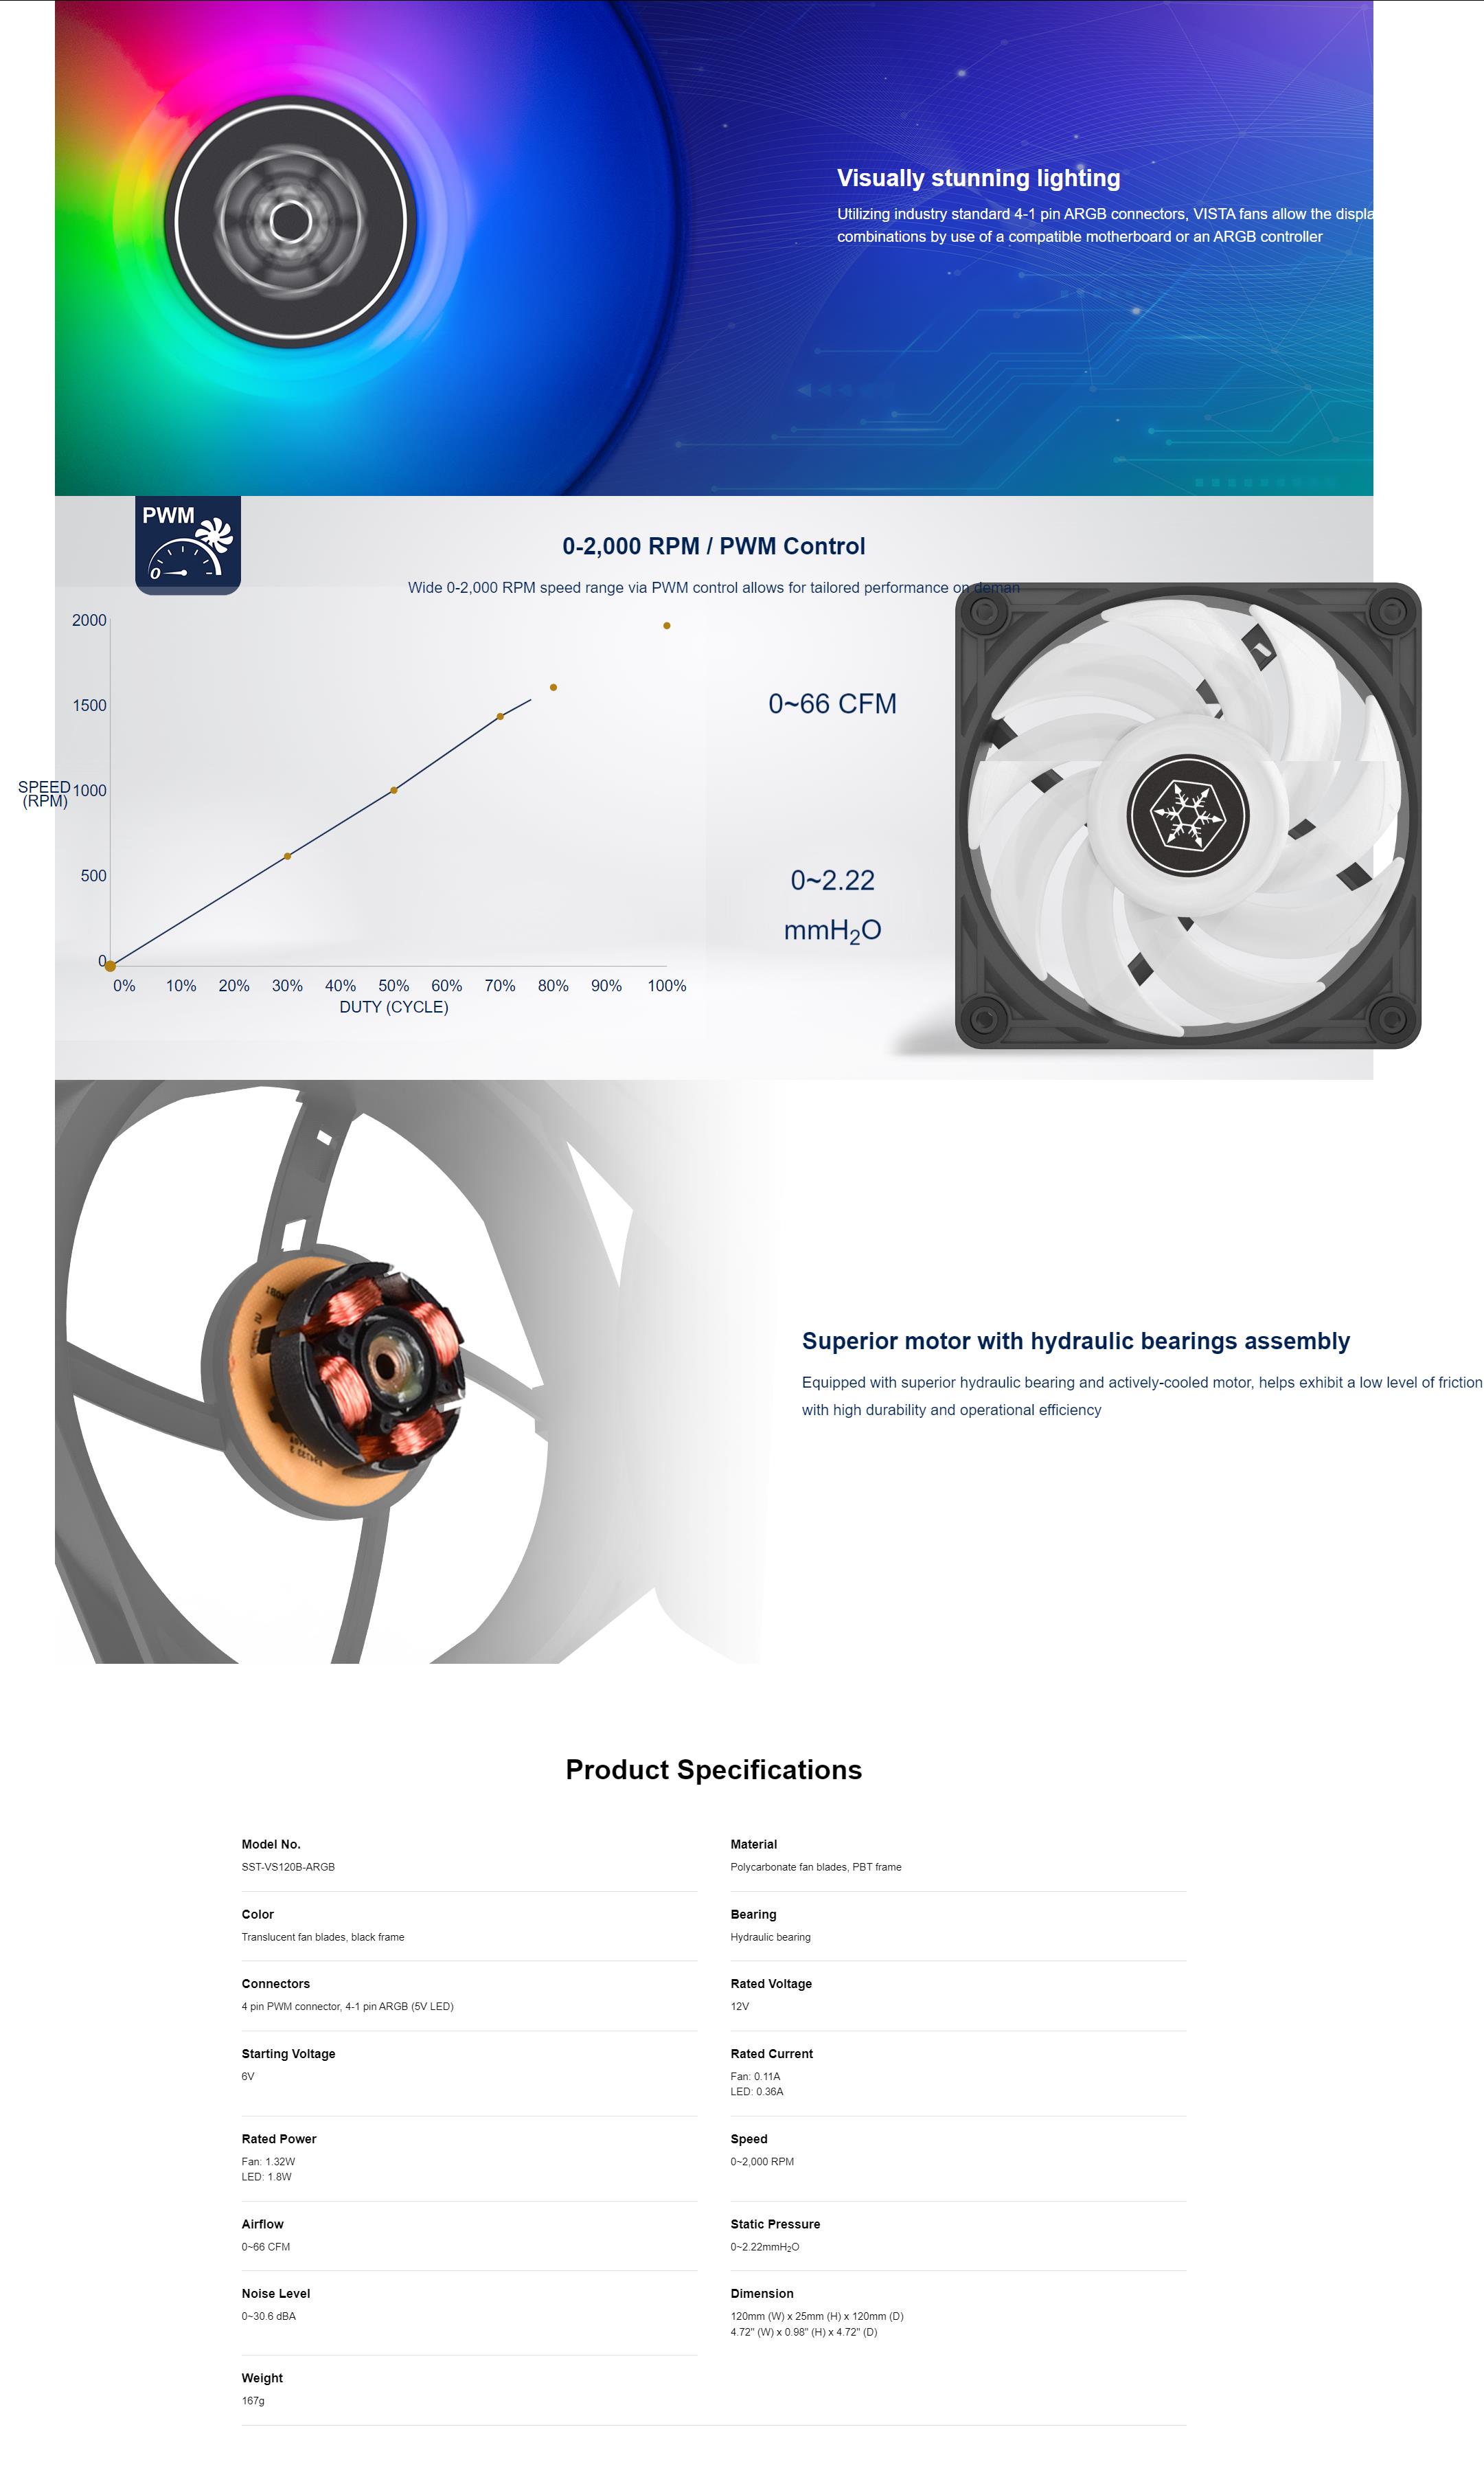 A large marketing image providing additional information about the product SilverStone VISTA 120mm PWM Cooling Fan - Additional alt info not provided